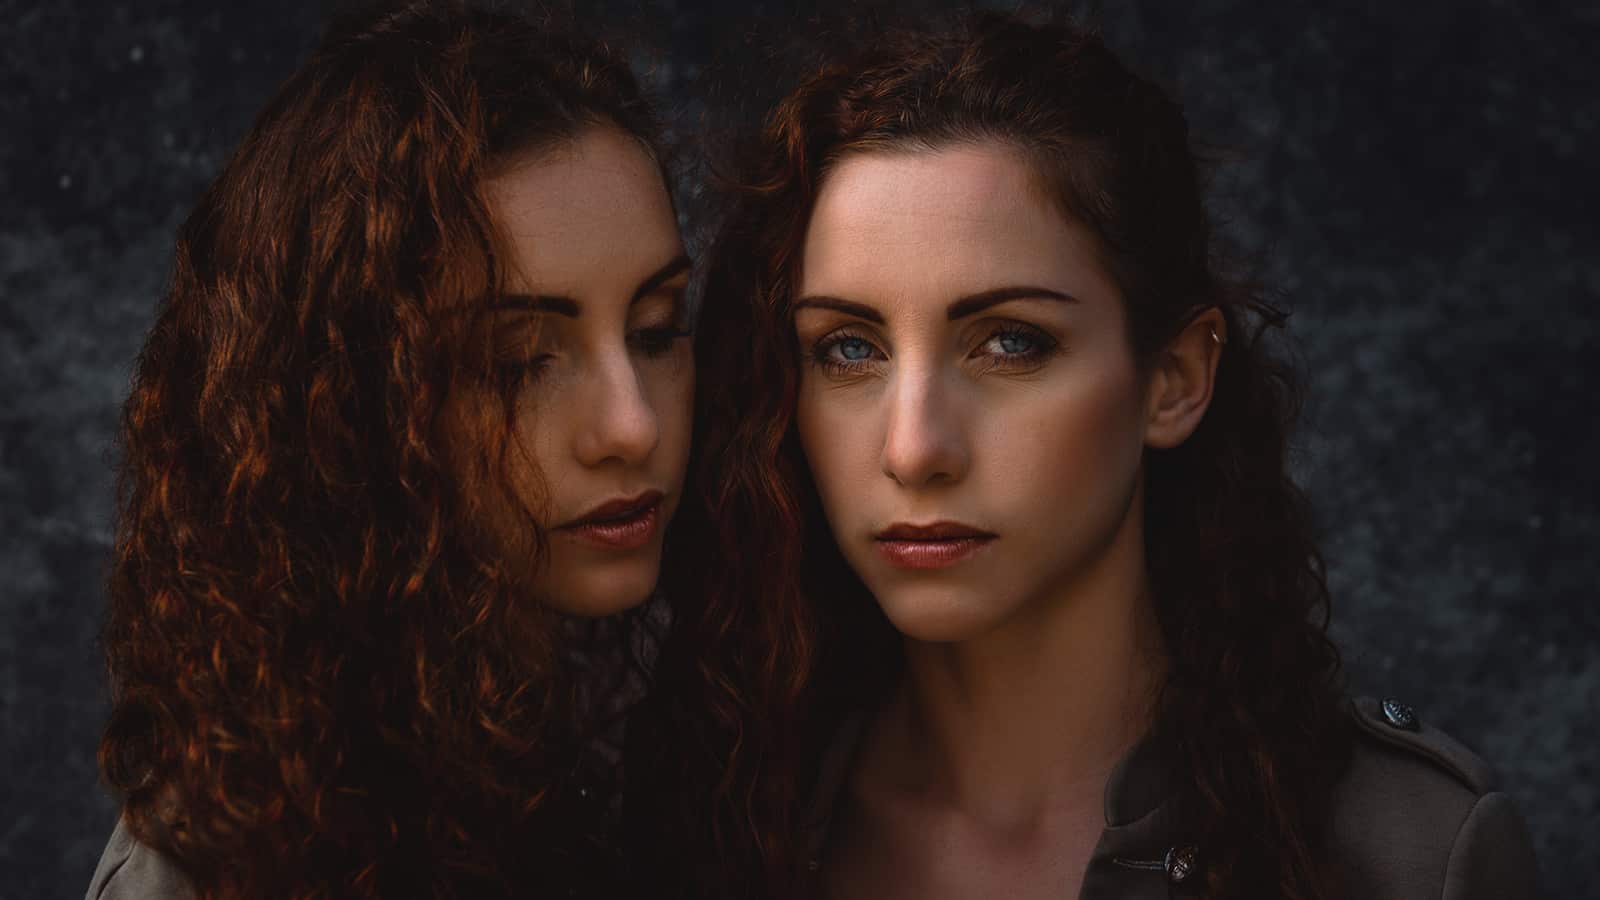 12 Phrases Identical Twins Never Want to Hear